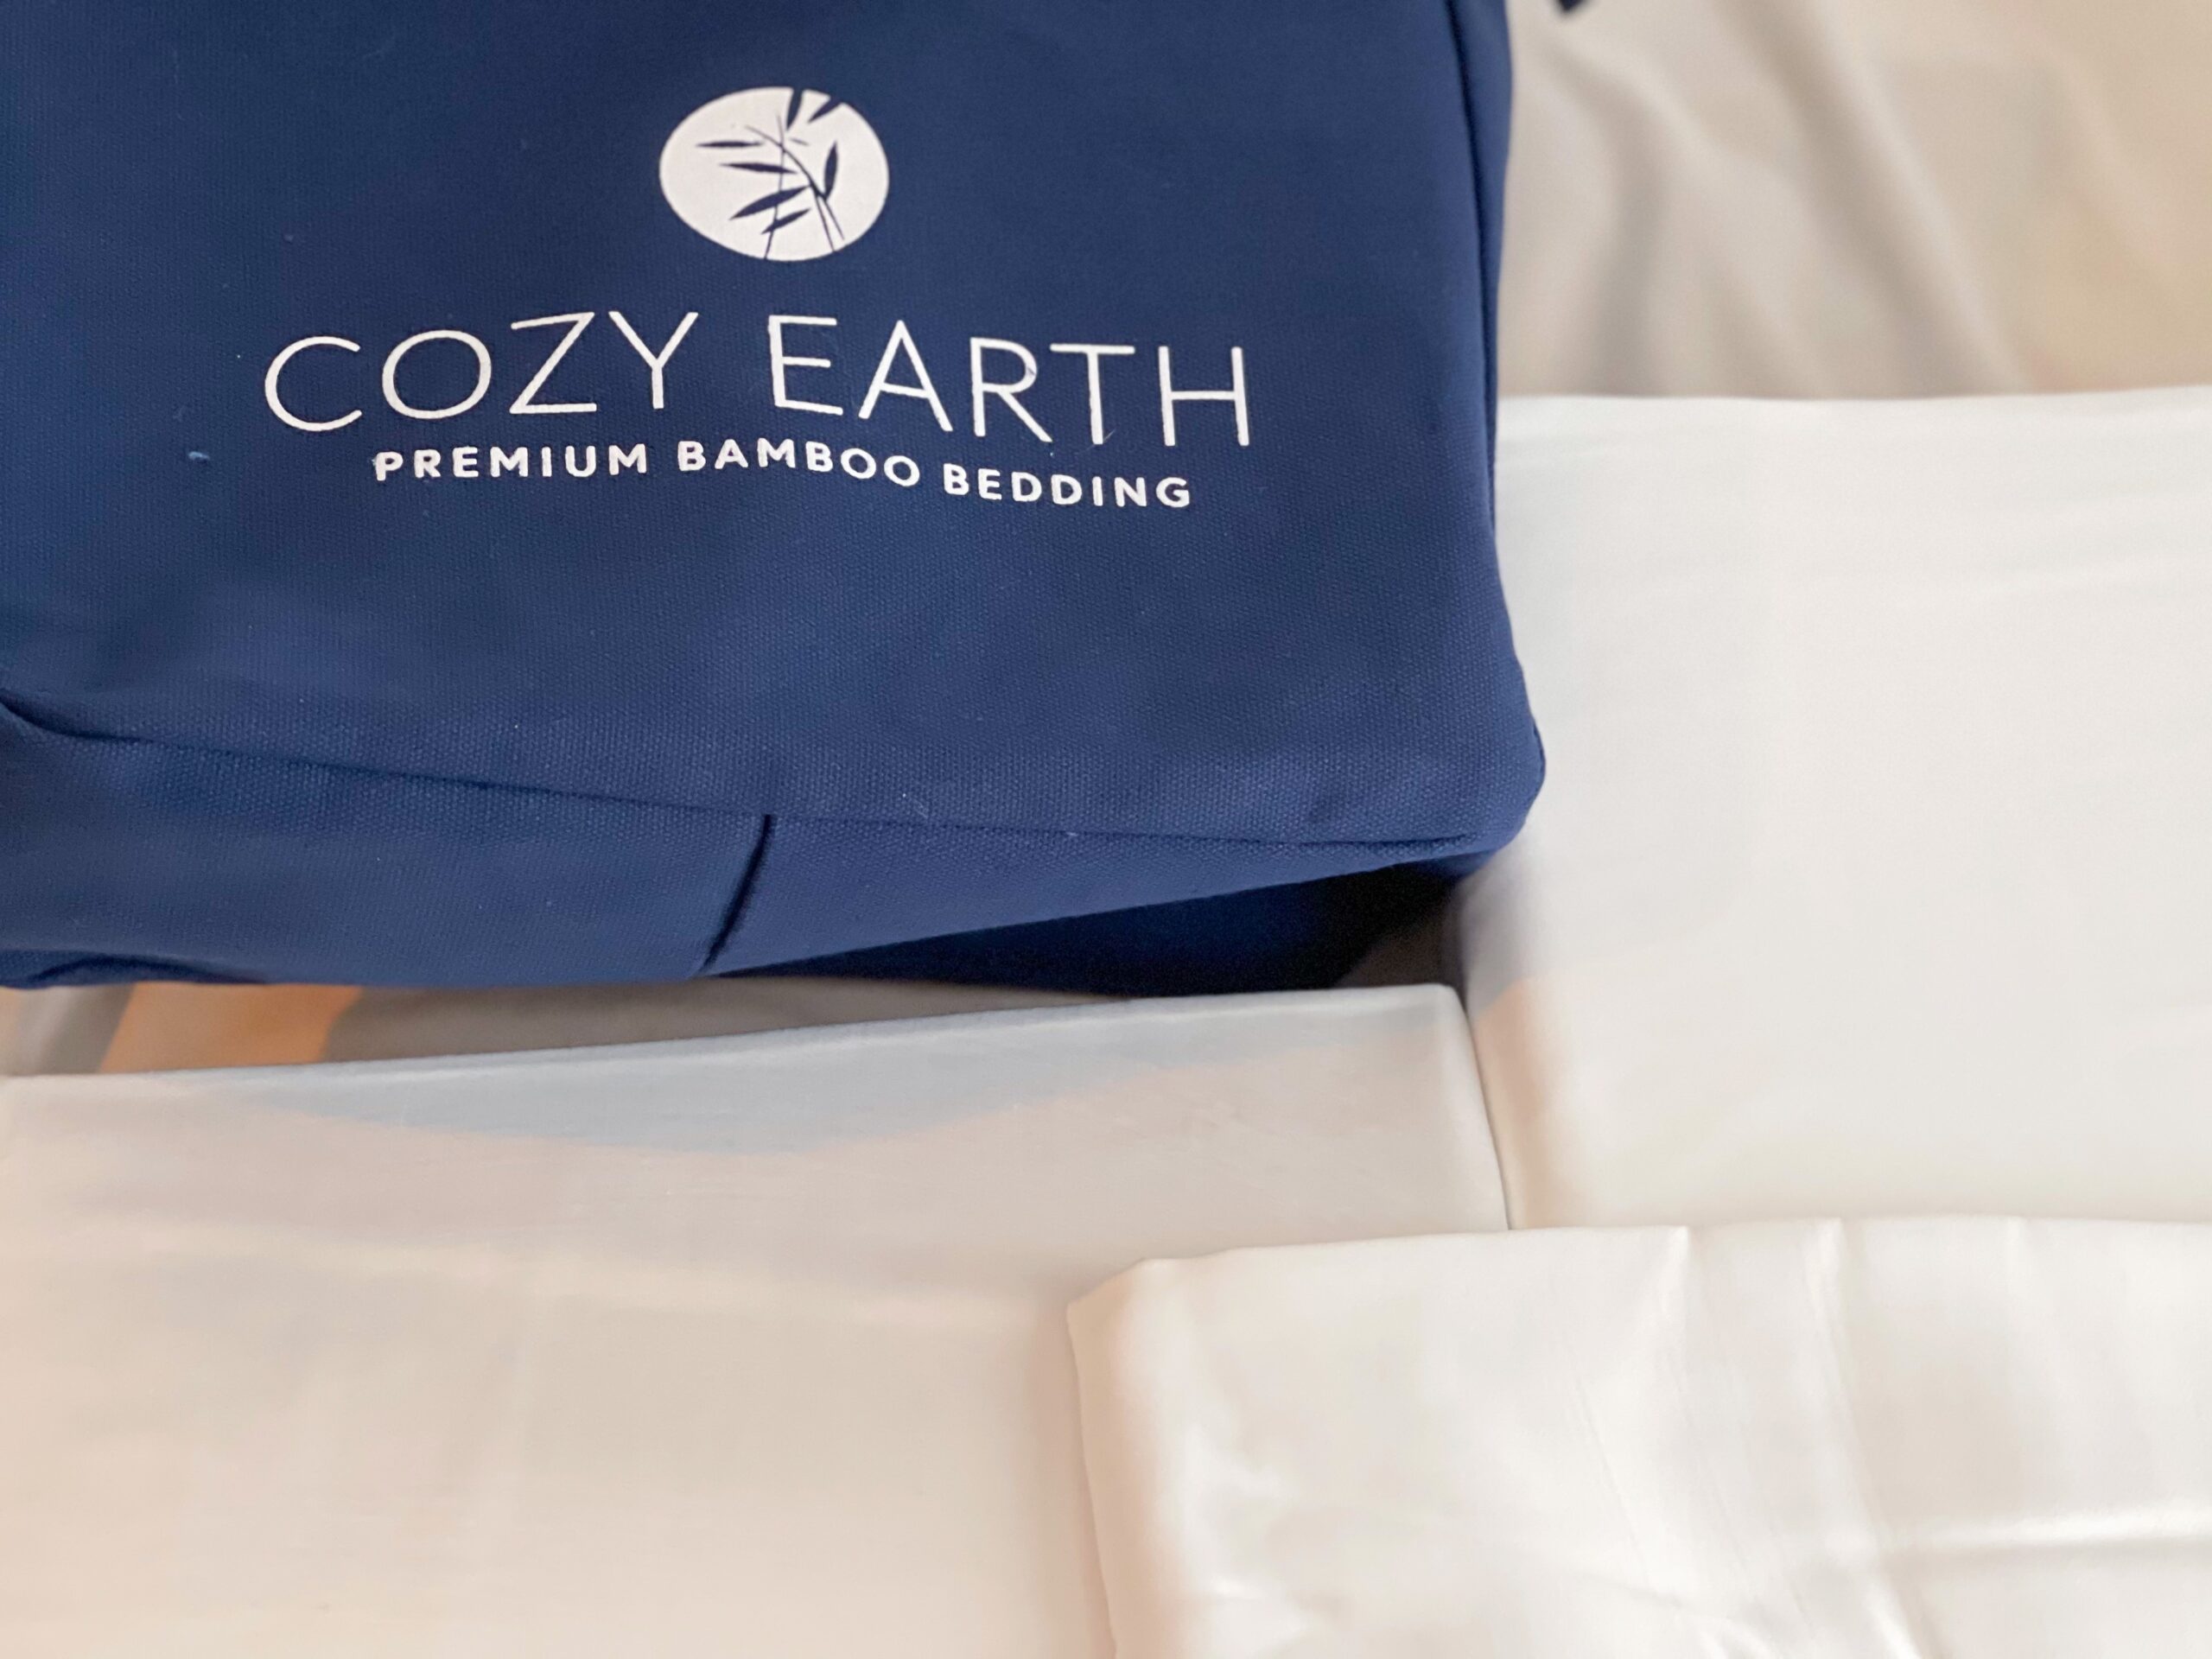 Bamboo bedding, luxury sheets, bamboo sheets, cozy earth